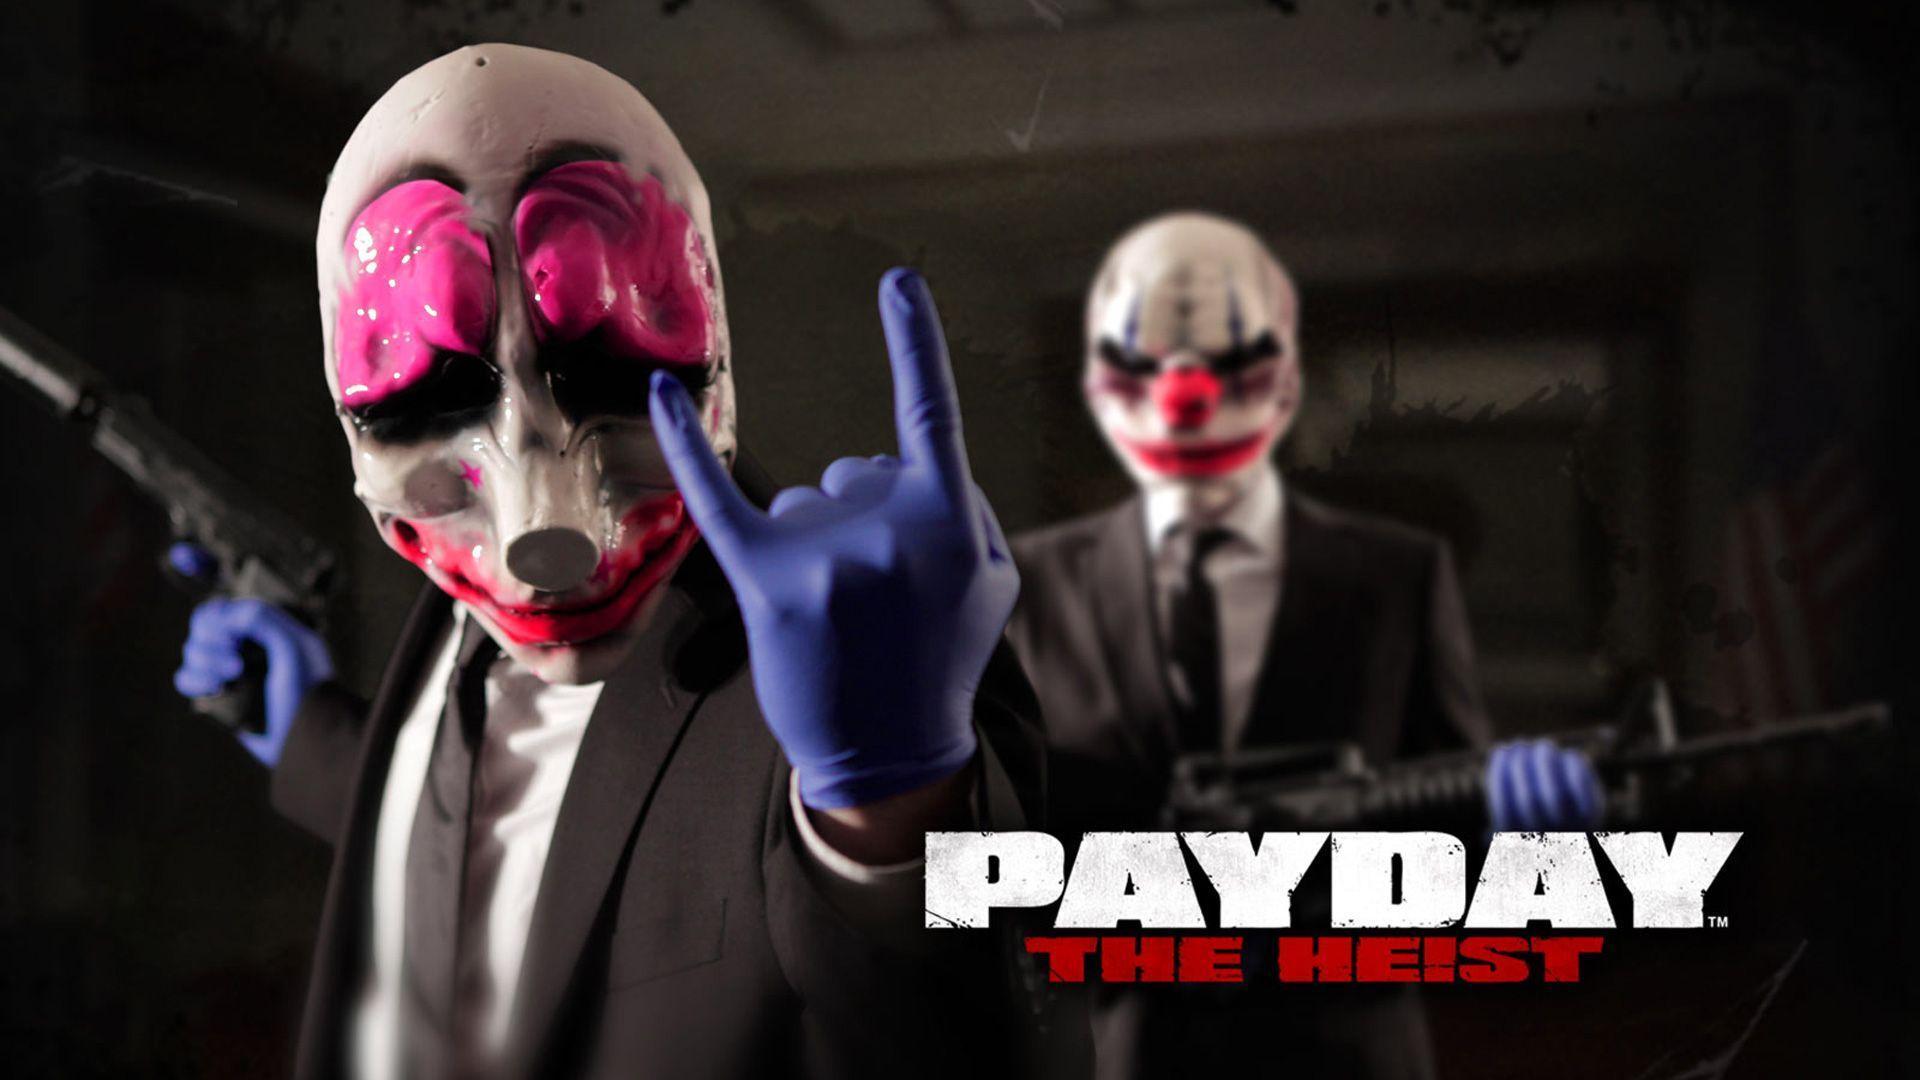 Payday the heist HD Wallpaperx1080